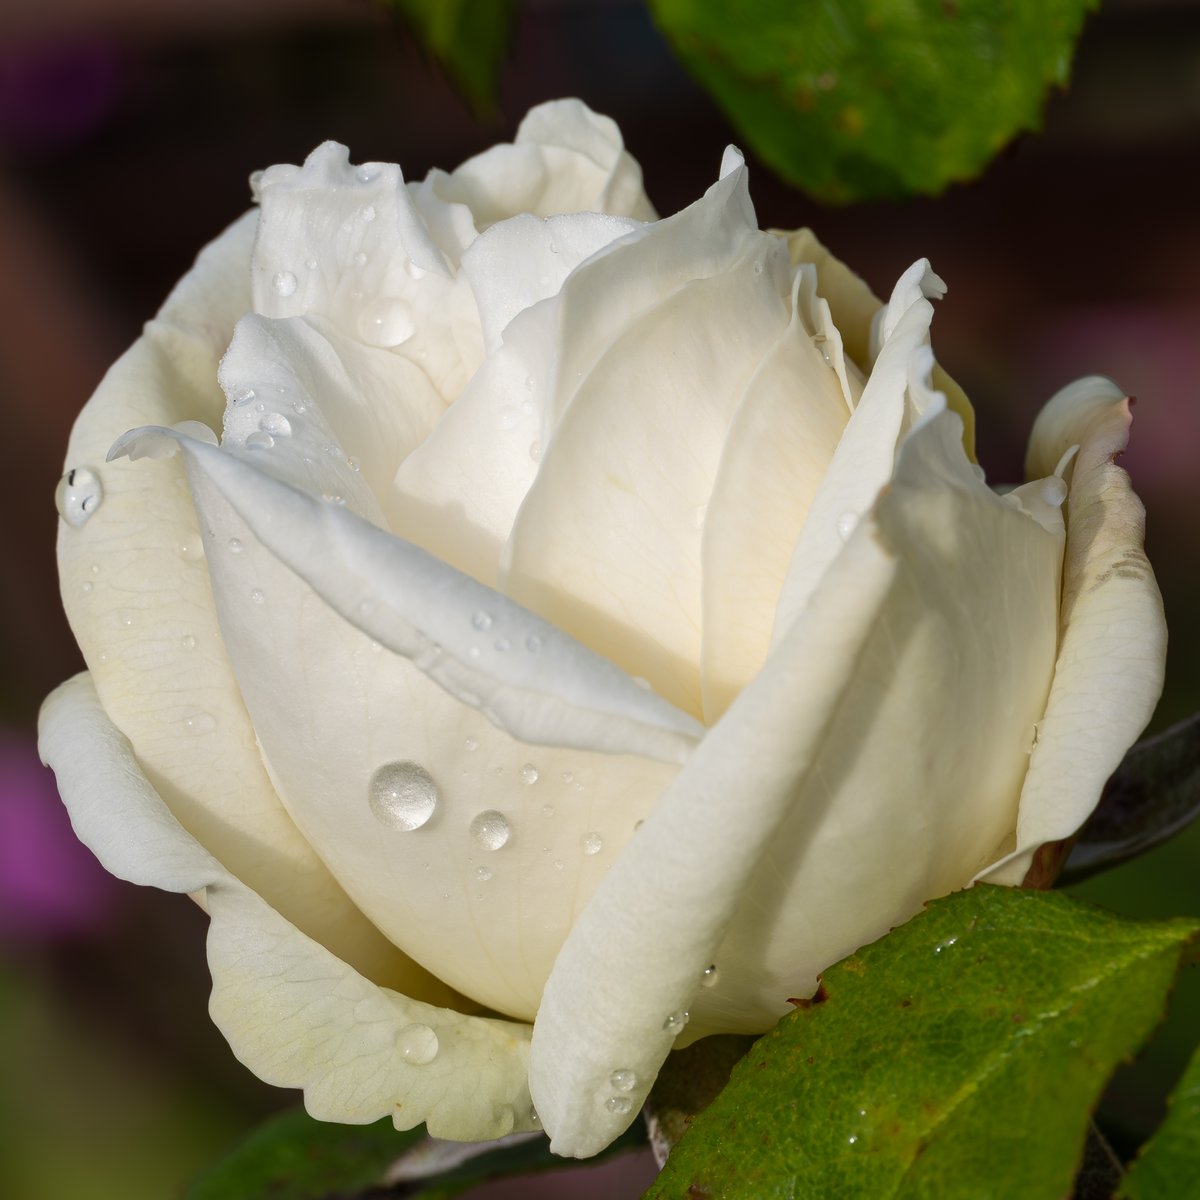 A white rose for #RoseWednesday  #Roses #Flowers